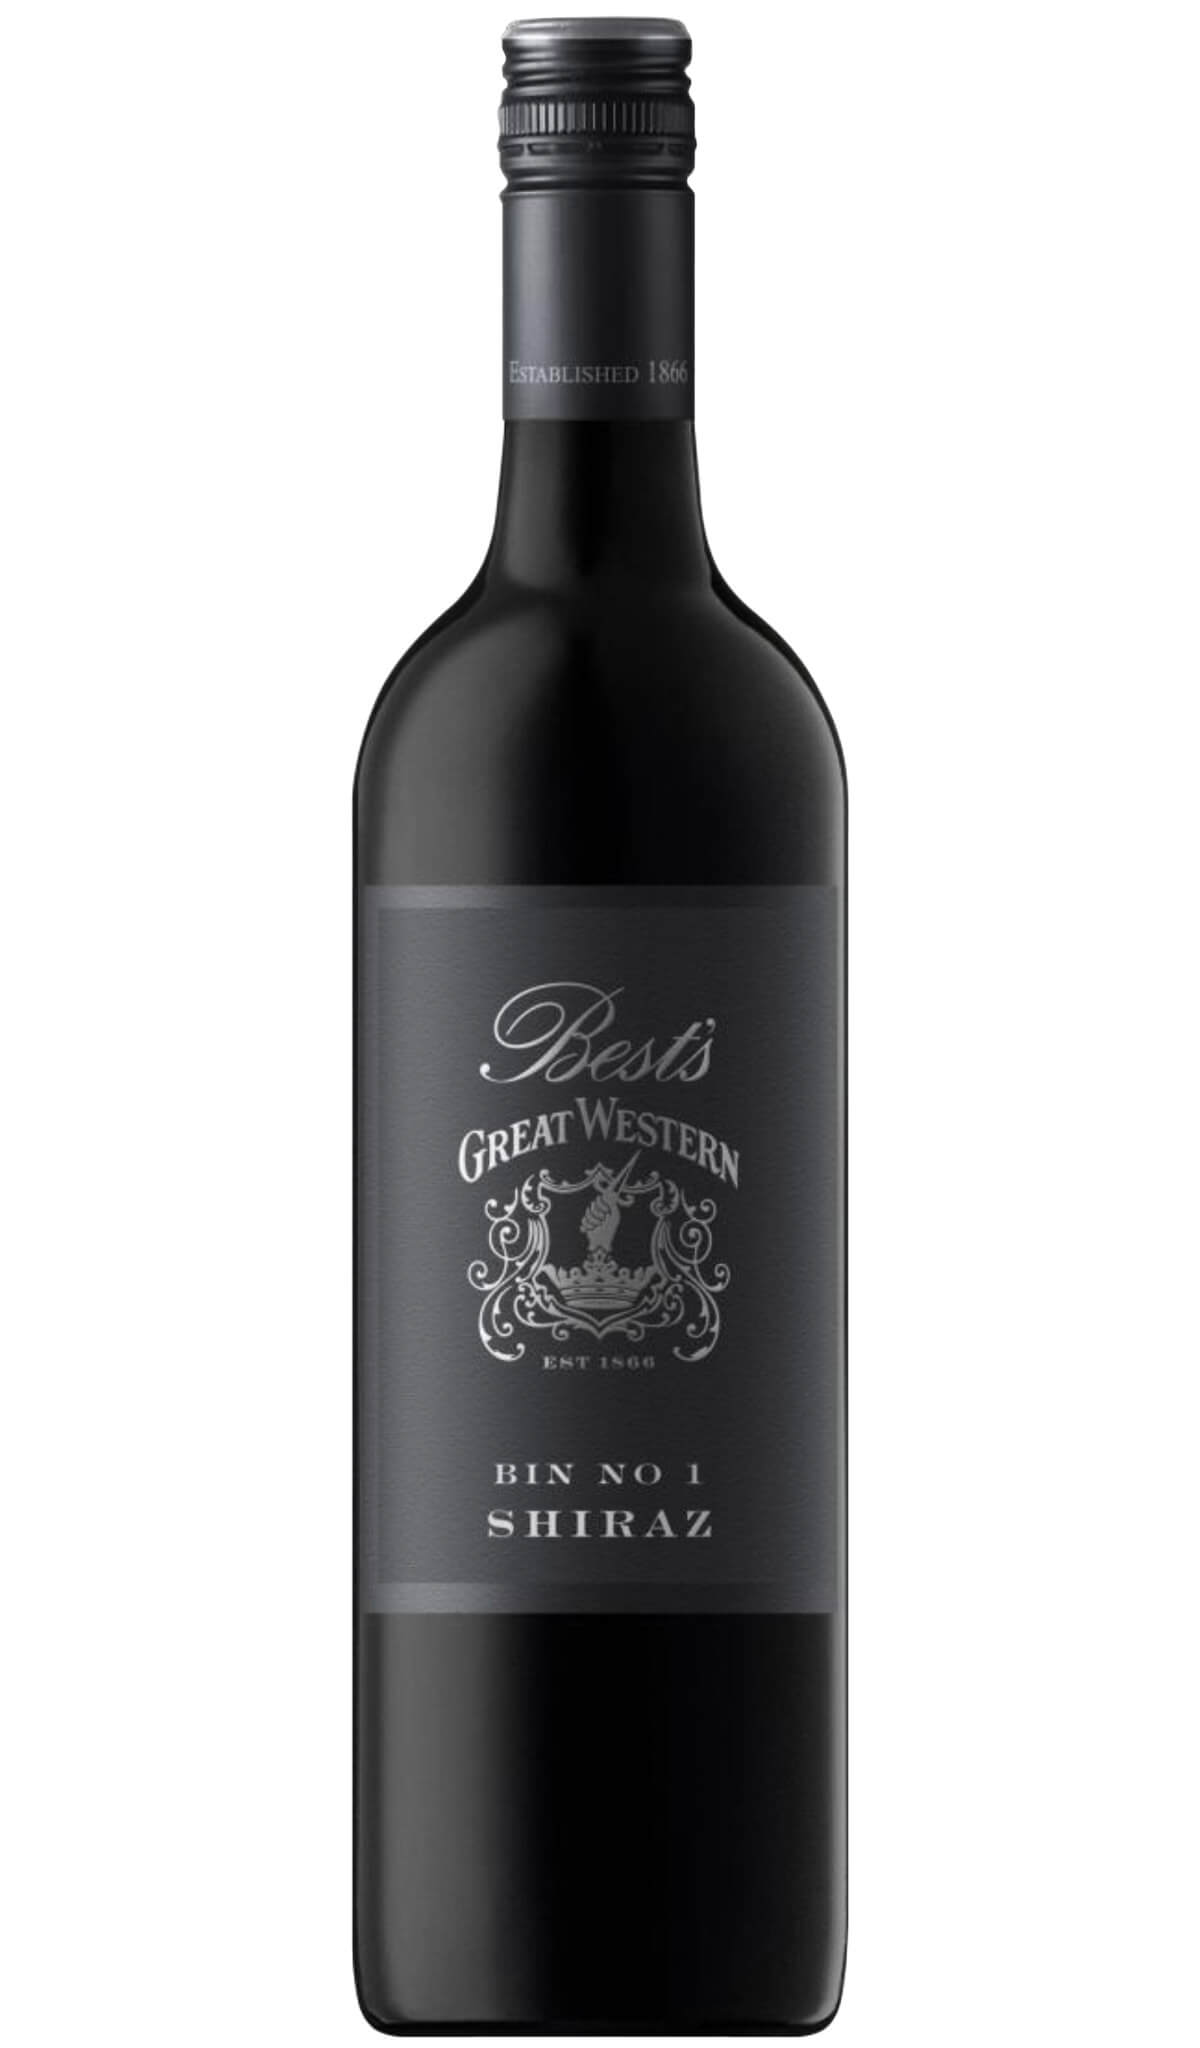 Find out more or buy Best's Bin 1 Shiraz 2020 (Great Western) online at Wine Sellers Direct - Australia’s independent liquor specialists.